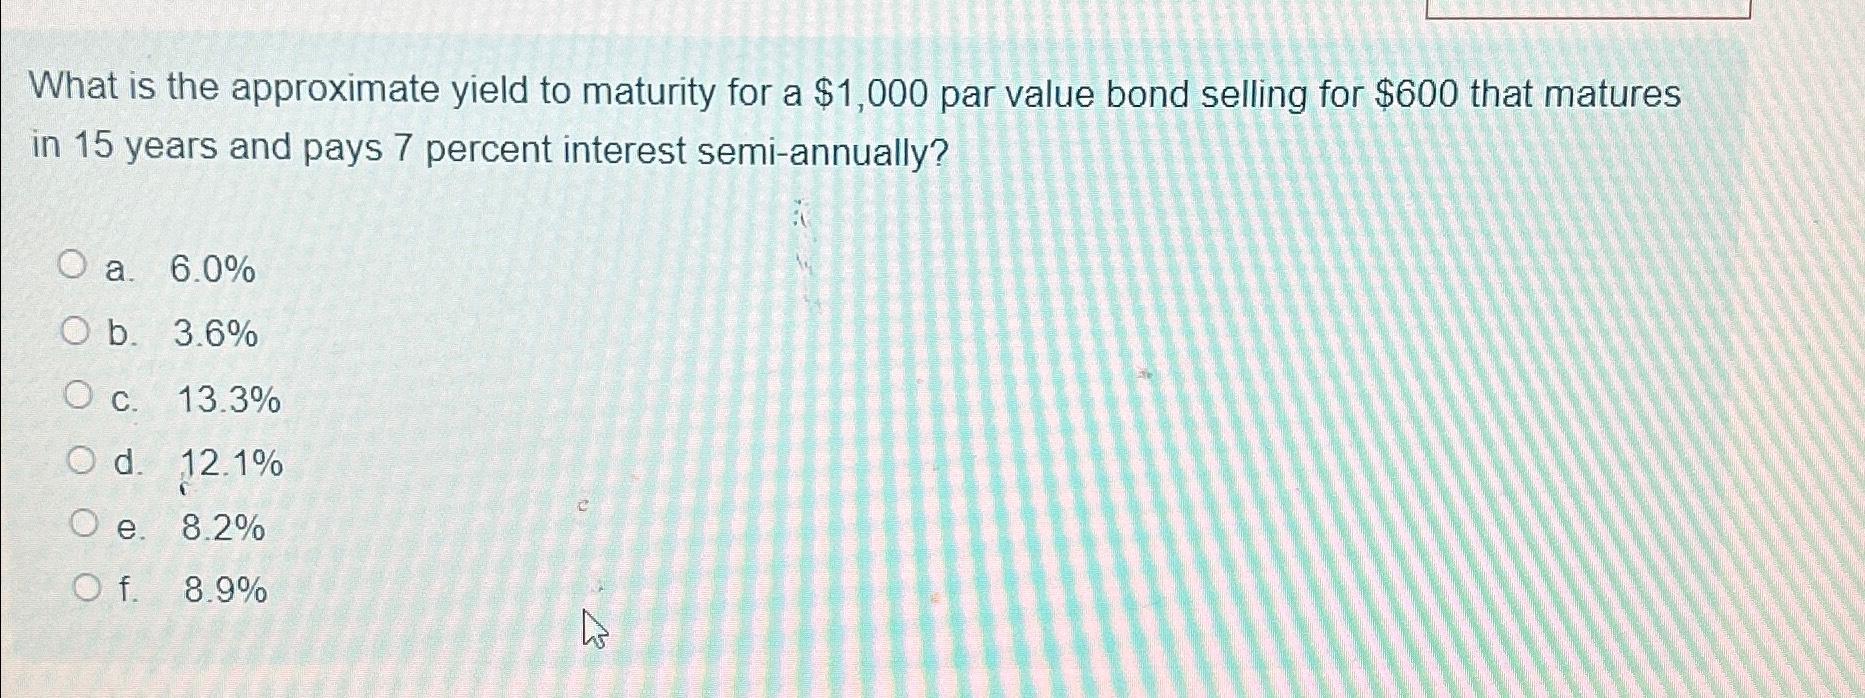 What is the approximate yield to maturity for a $1,000 par value bond selling for $600 that matures in 15